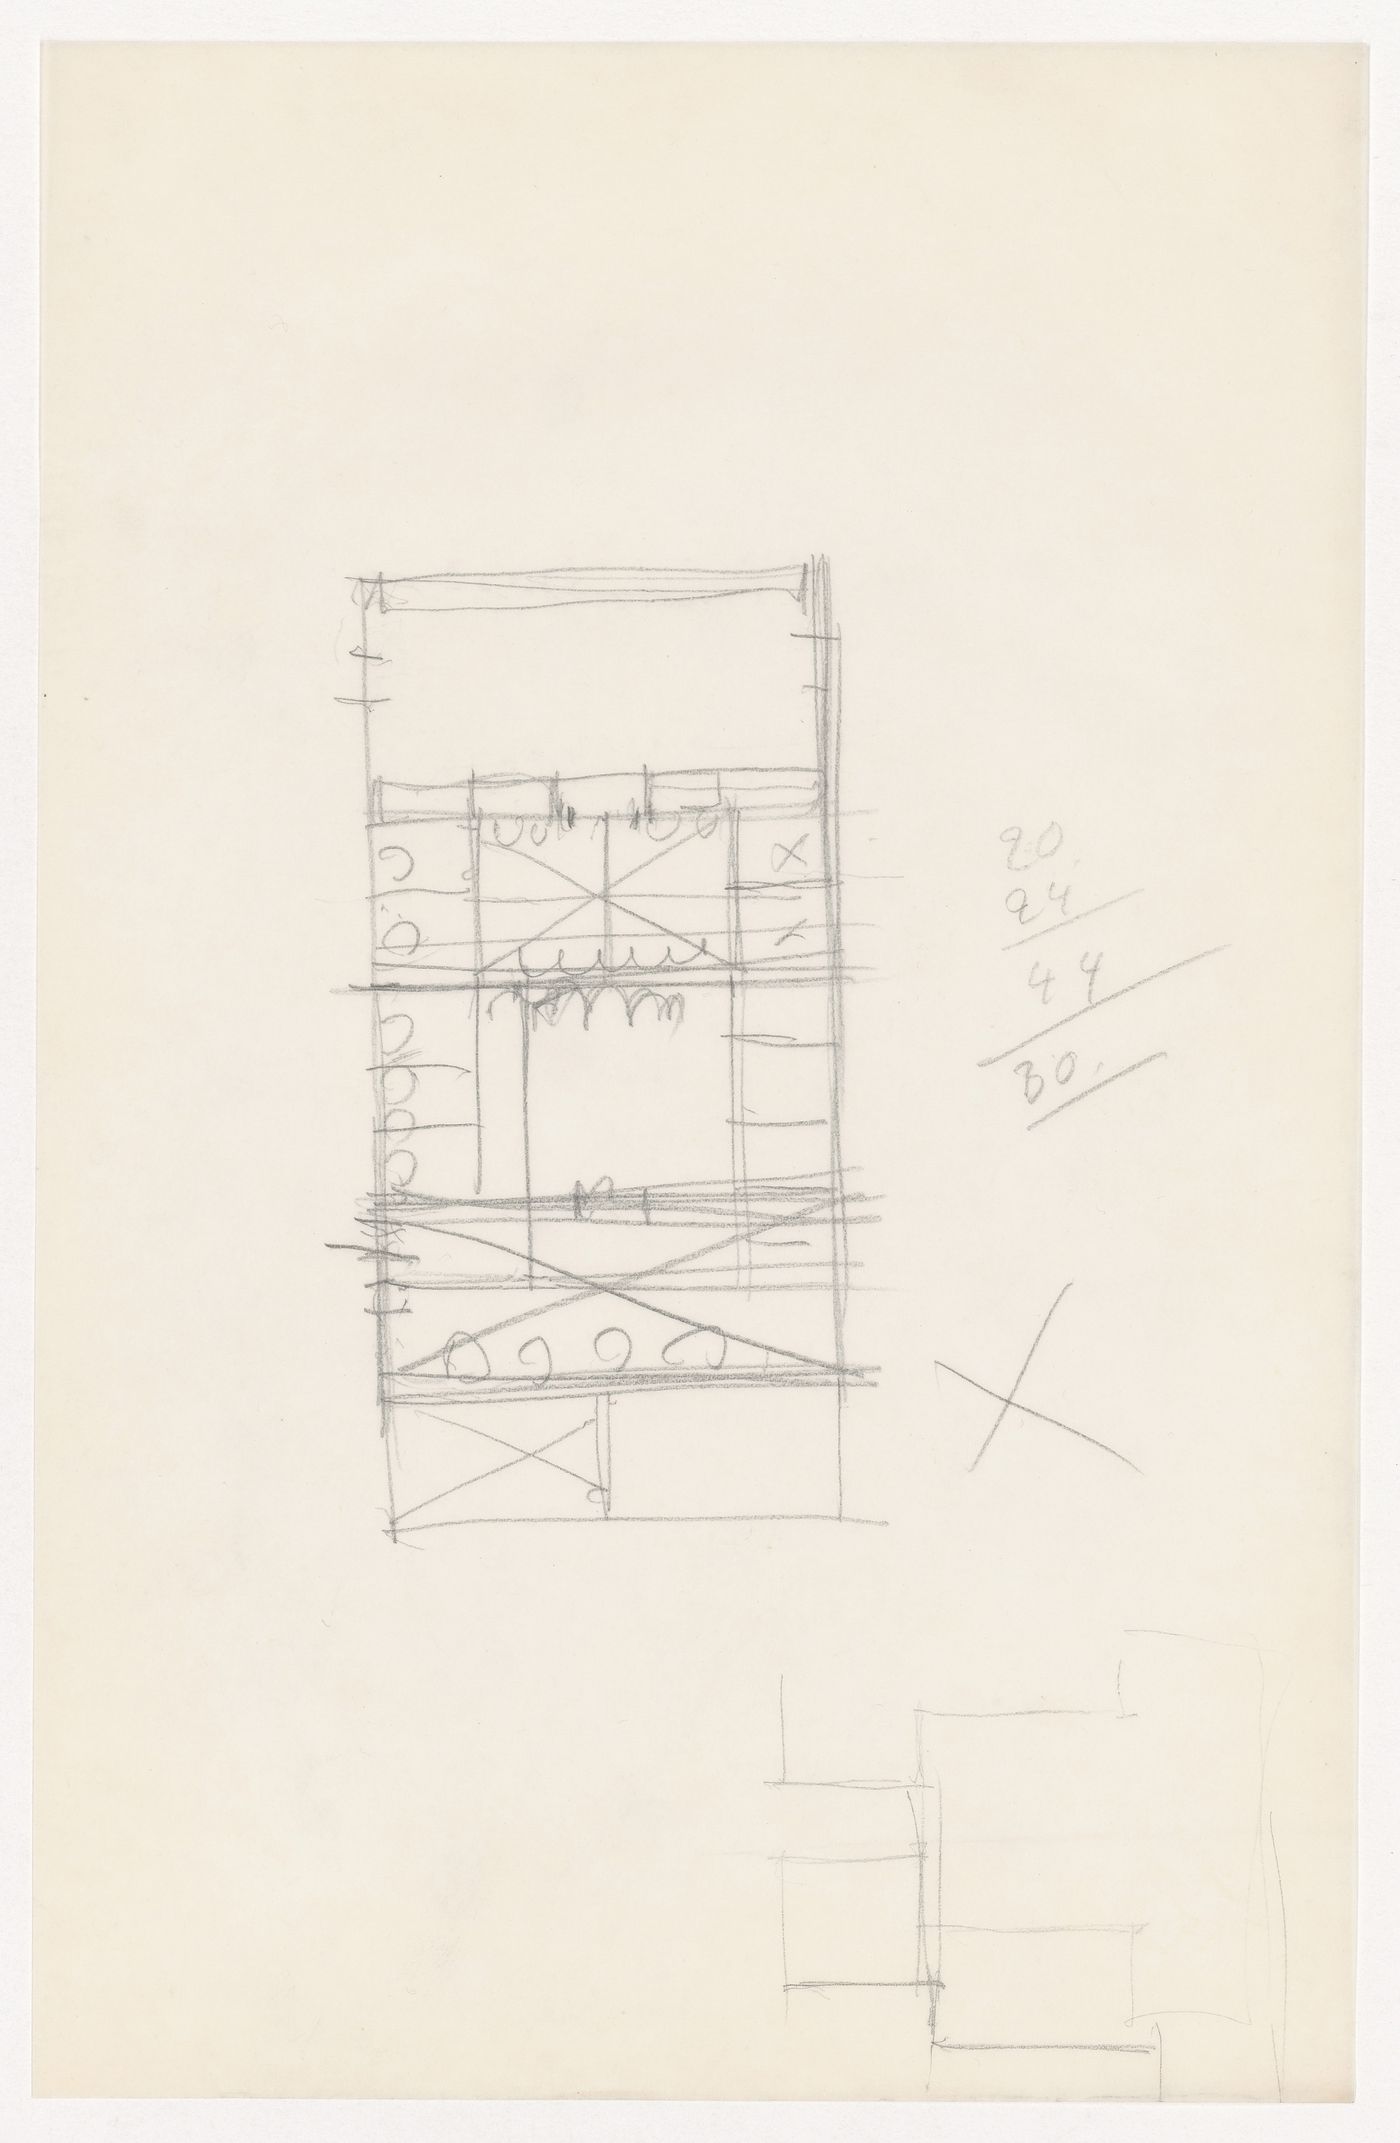 Partial sketch plan for the Metallurgy Building, Illinois Institute of Technology, Chicago, with an unidentified sketch